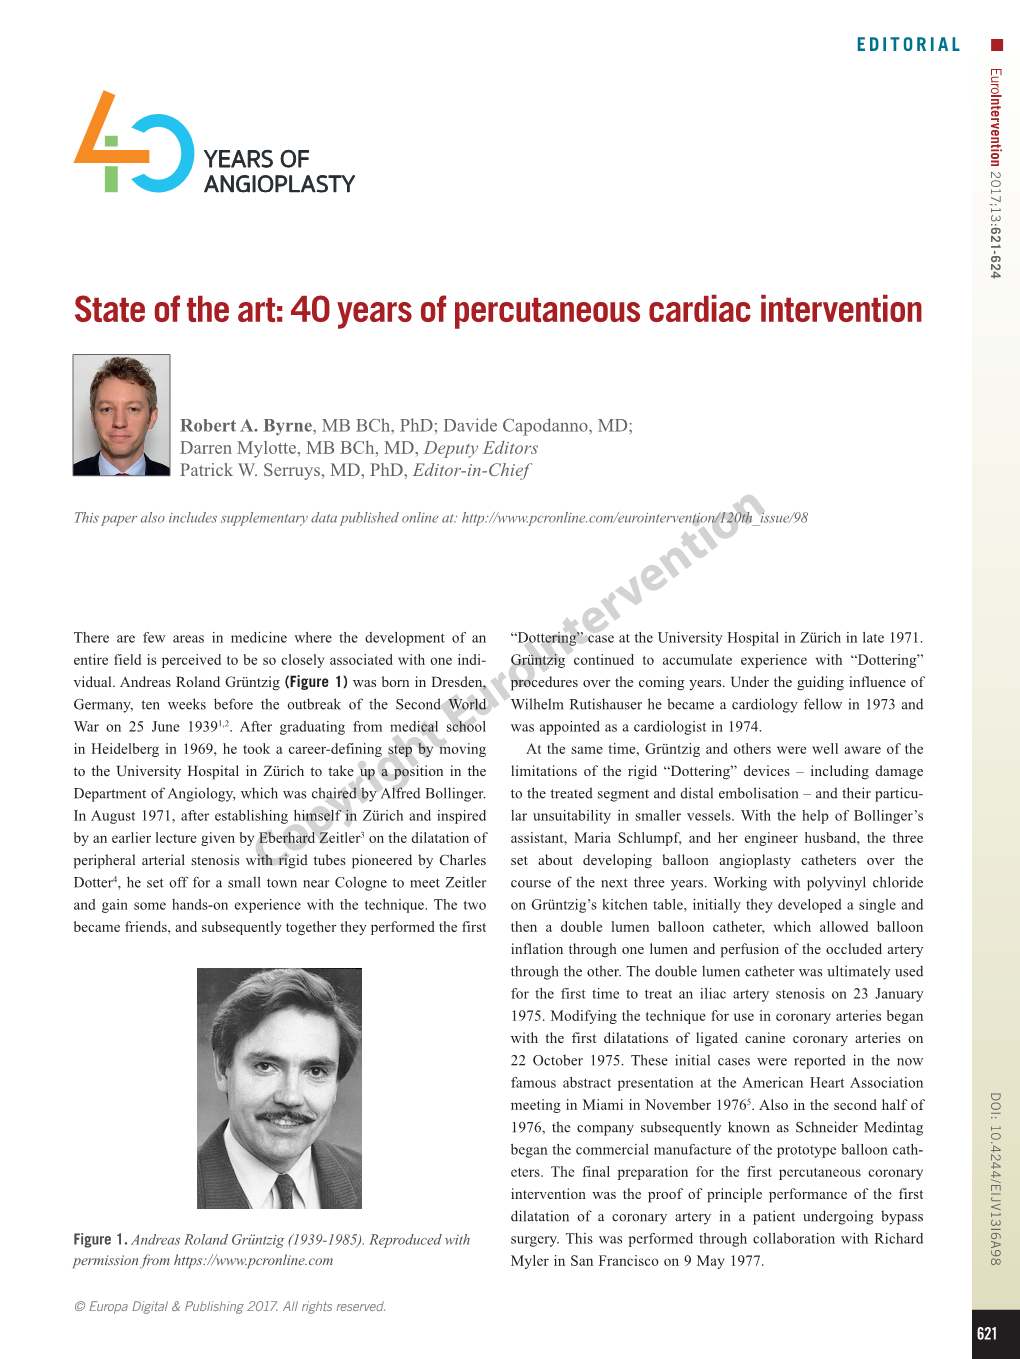 State of the Art: 40 Years of Percutaneous Cardiac Intervention